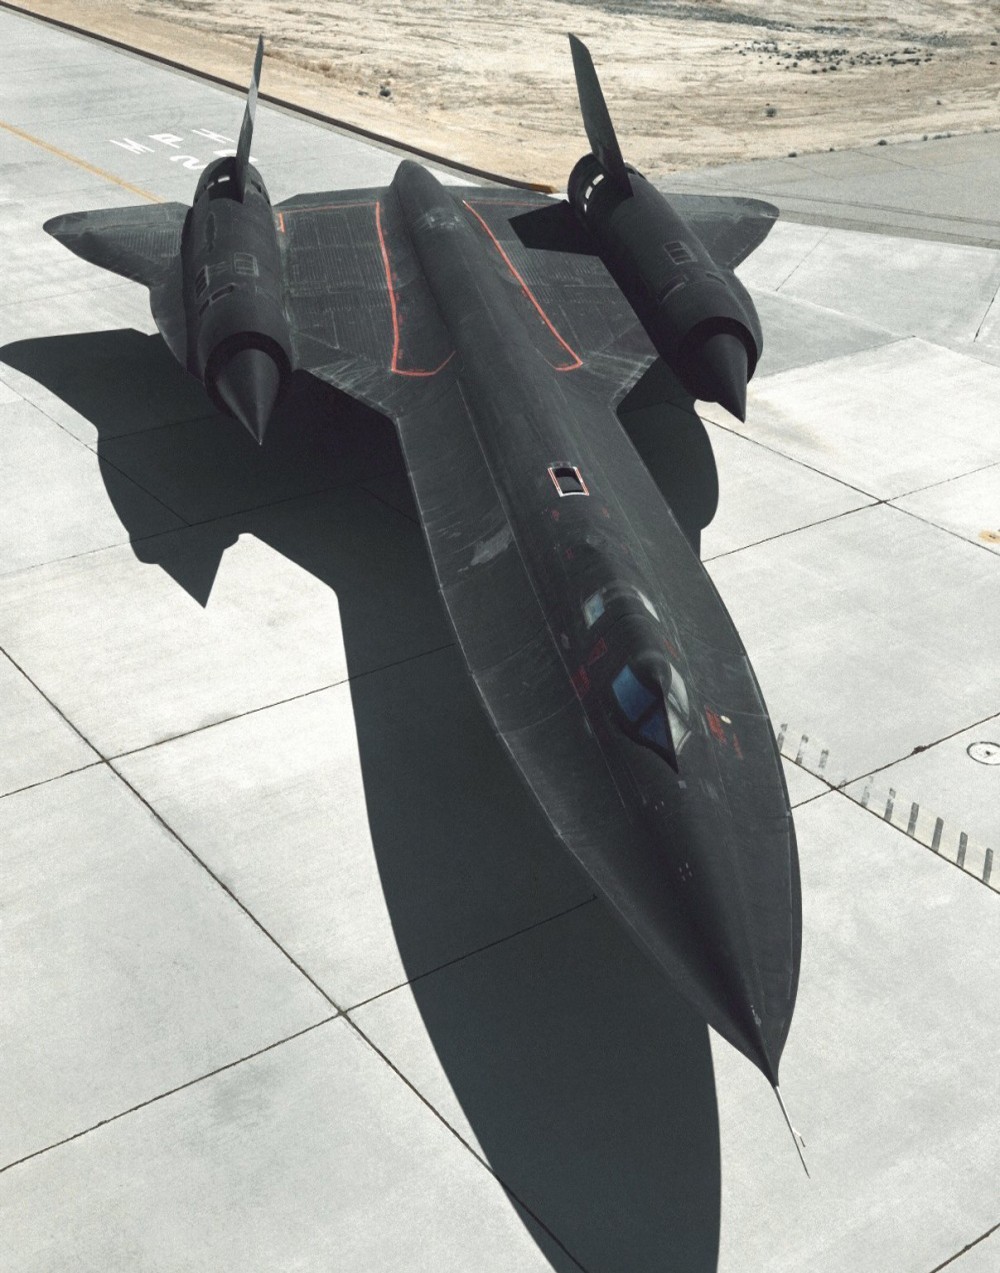 Here’s Everything we know about Mach 5+ ‘Son of Blackbird’ hypersonic jet design to replace the SR-71 Blackbird